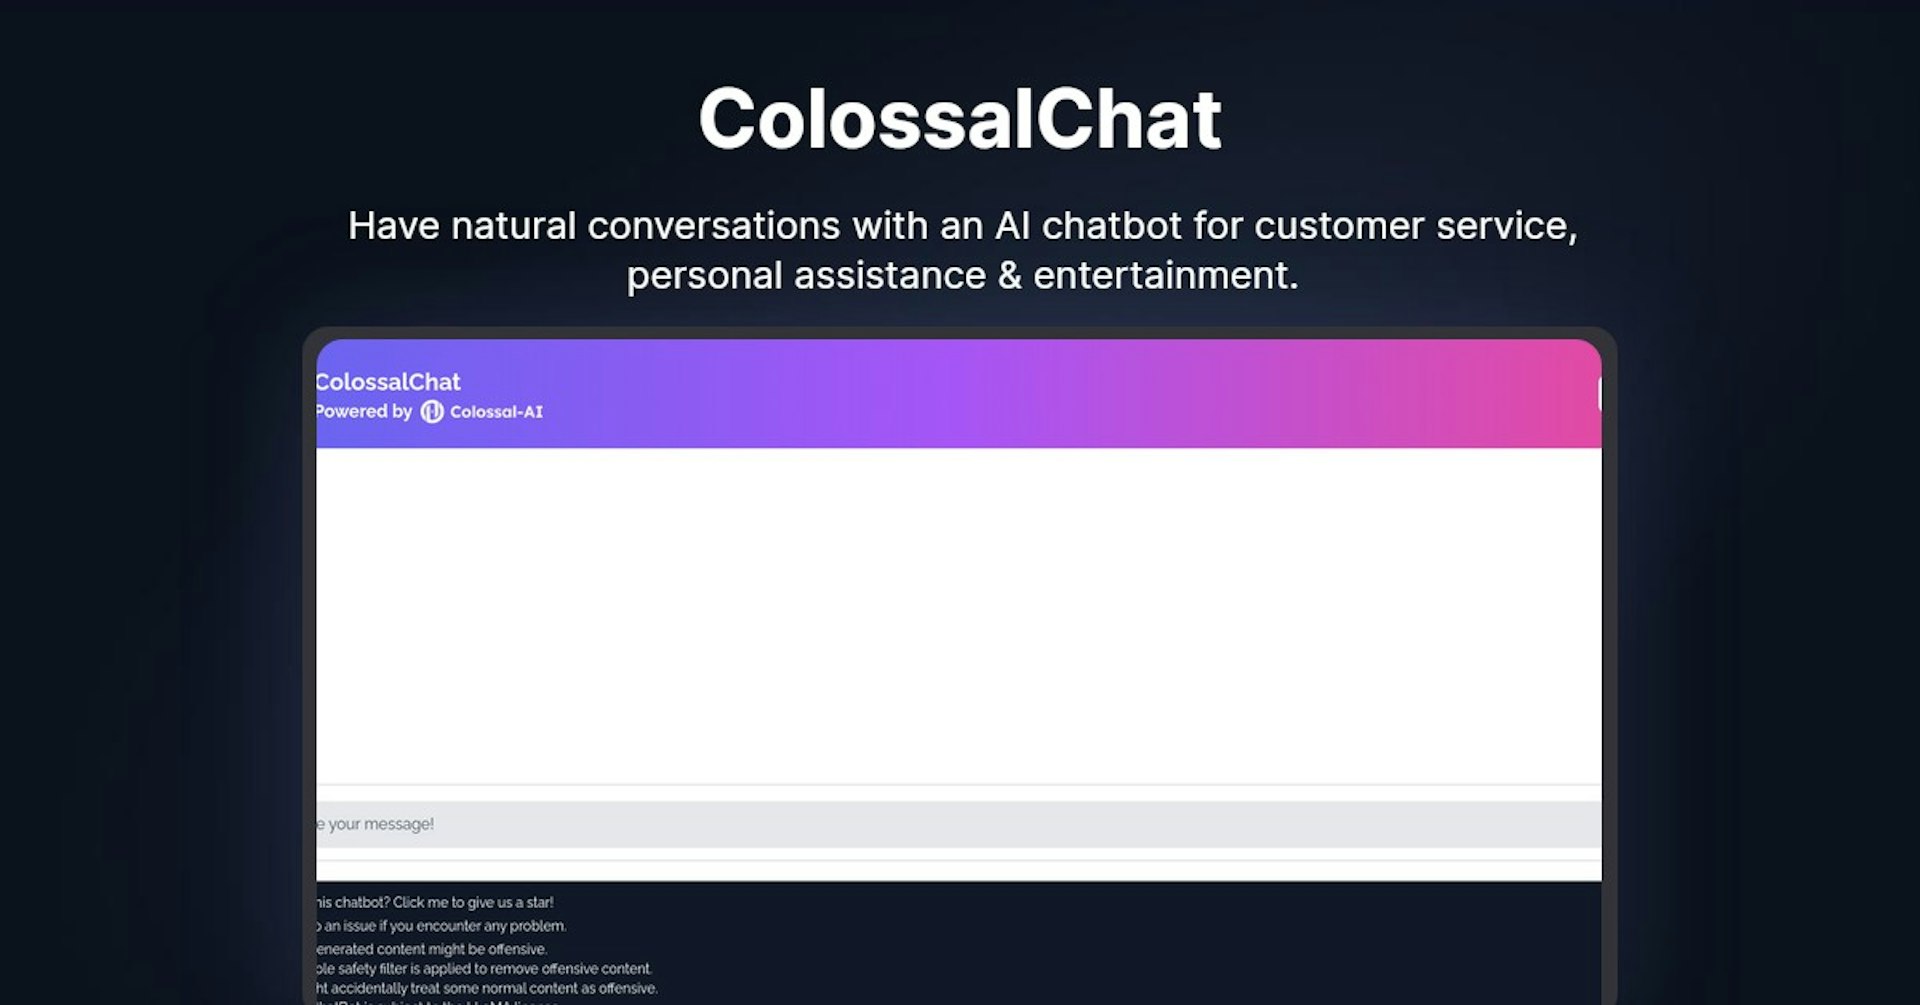 ColossalChat